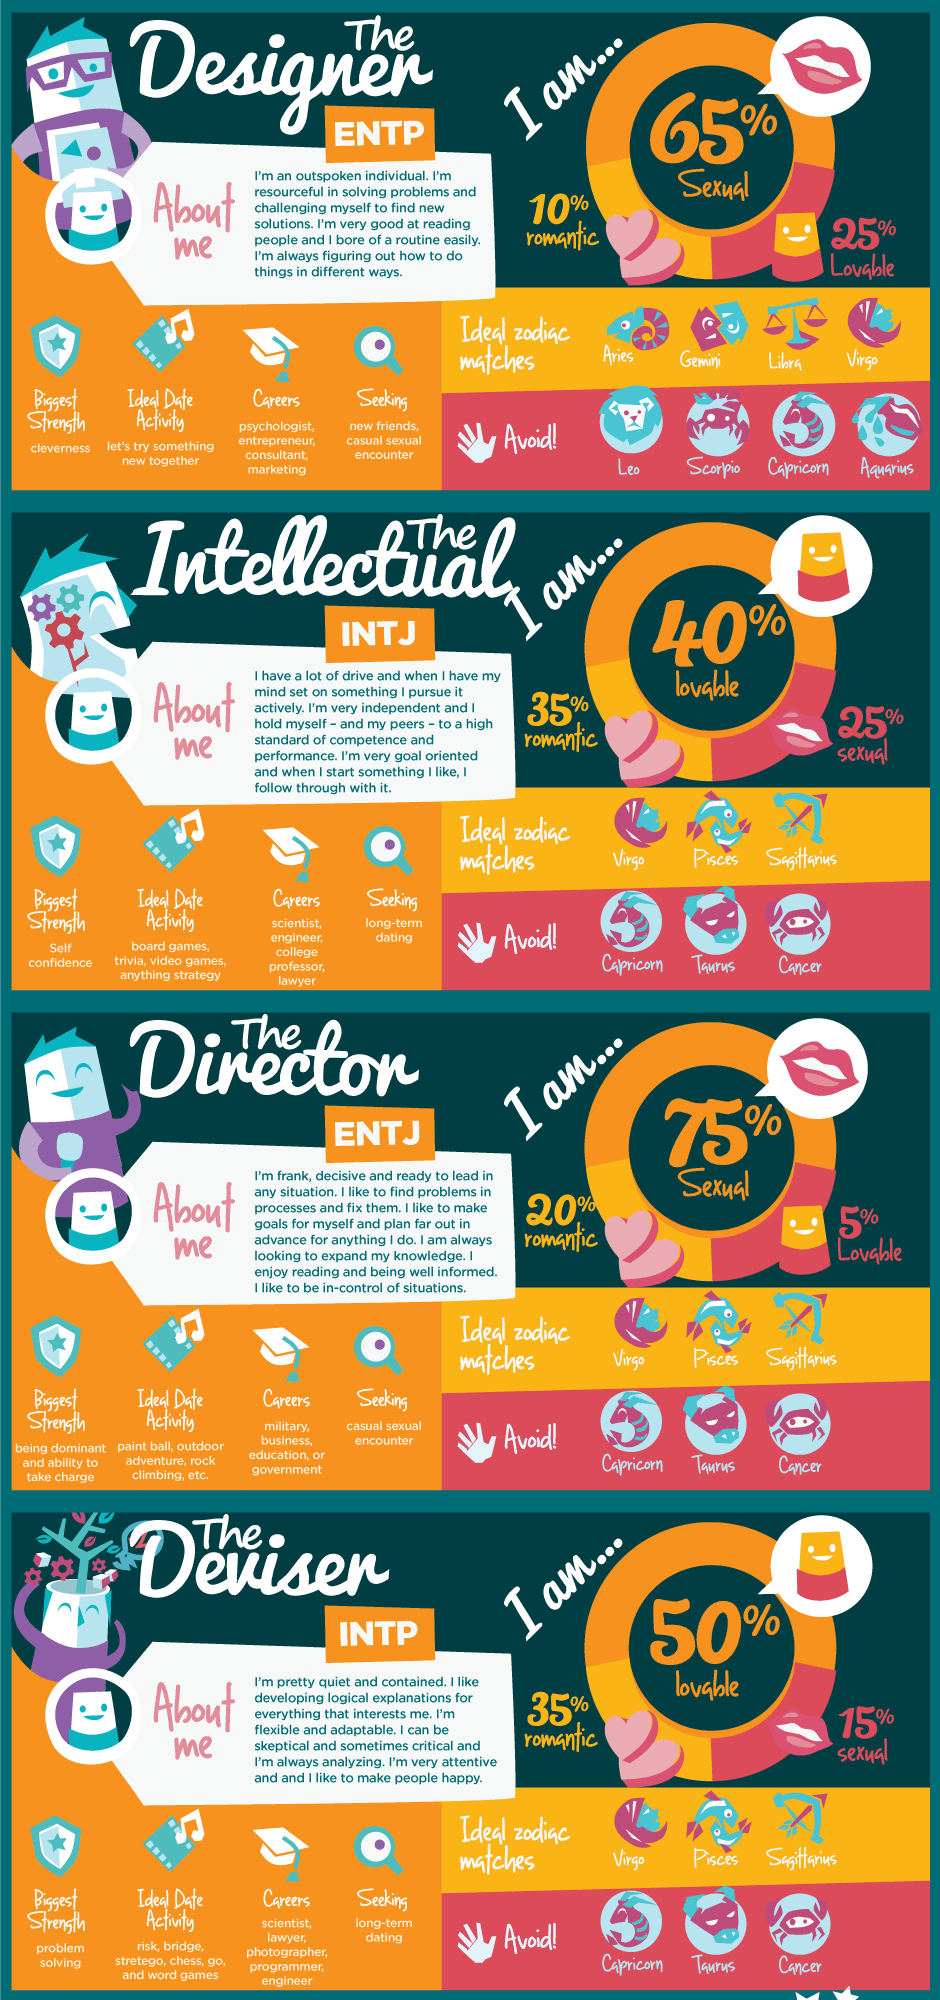 mbti dating infographic - part 1